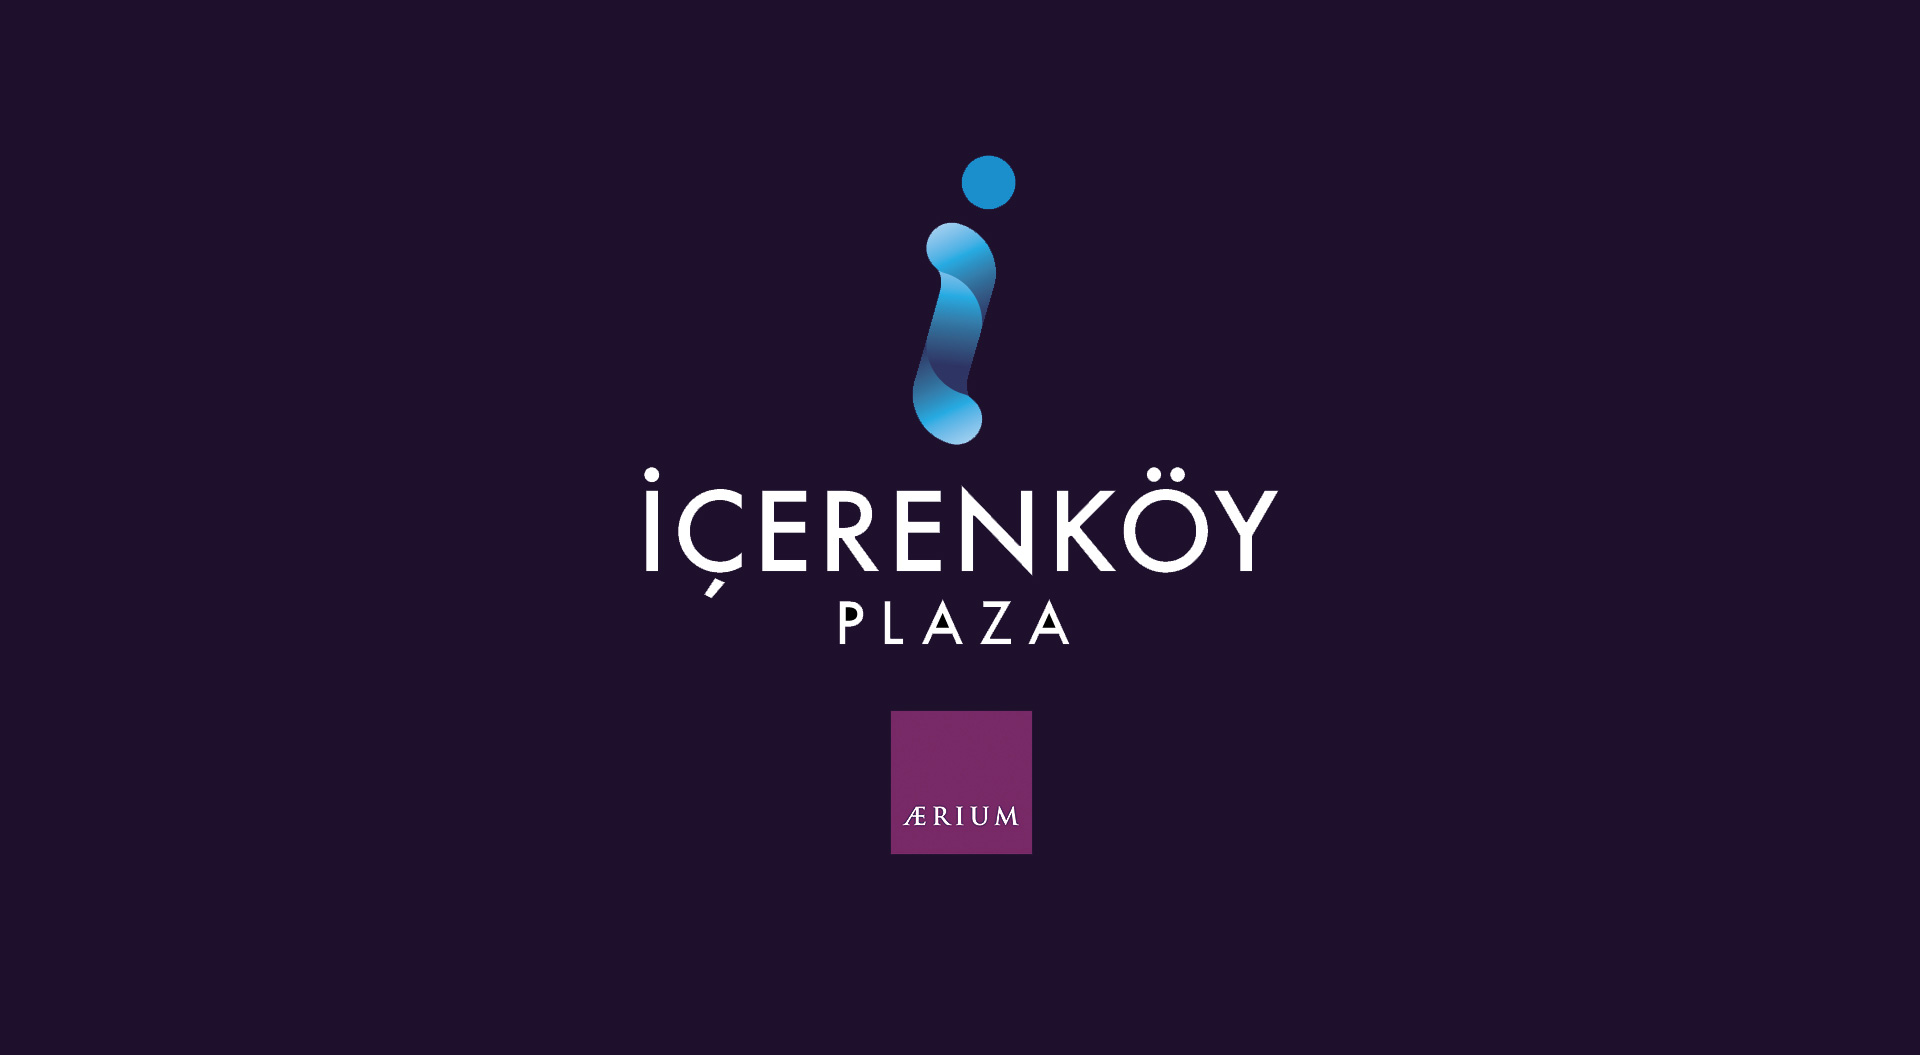 Shopping mall architecture, branding, format planning, interior design, food court restaurants, fashion stores, leisure and entertainment facilities - Icerenkoy Istanbul